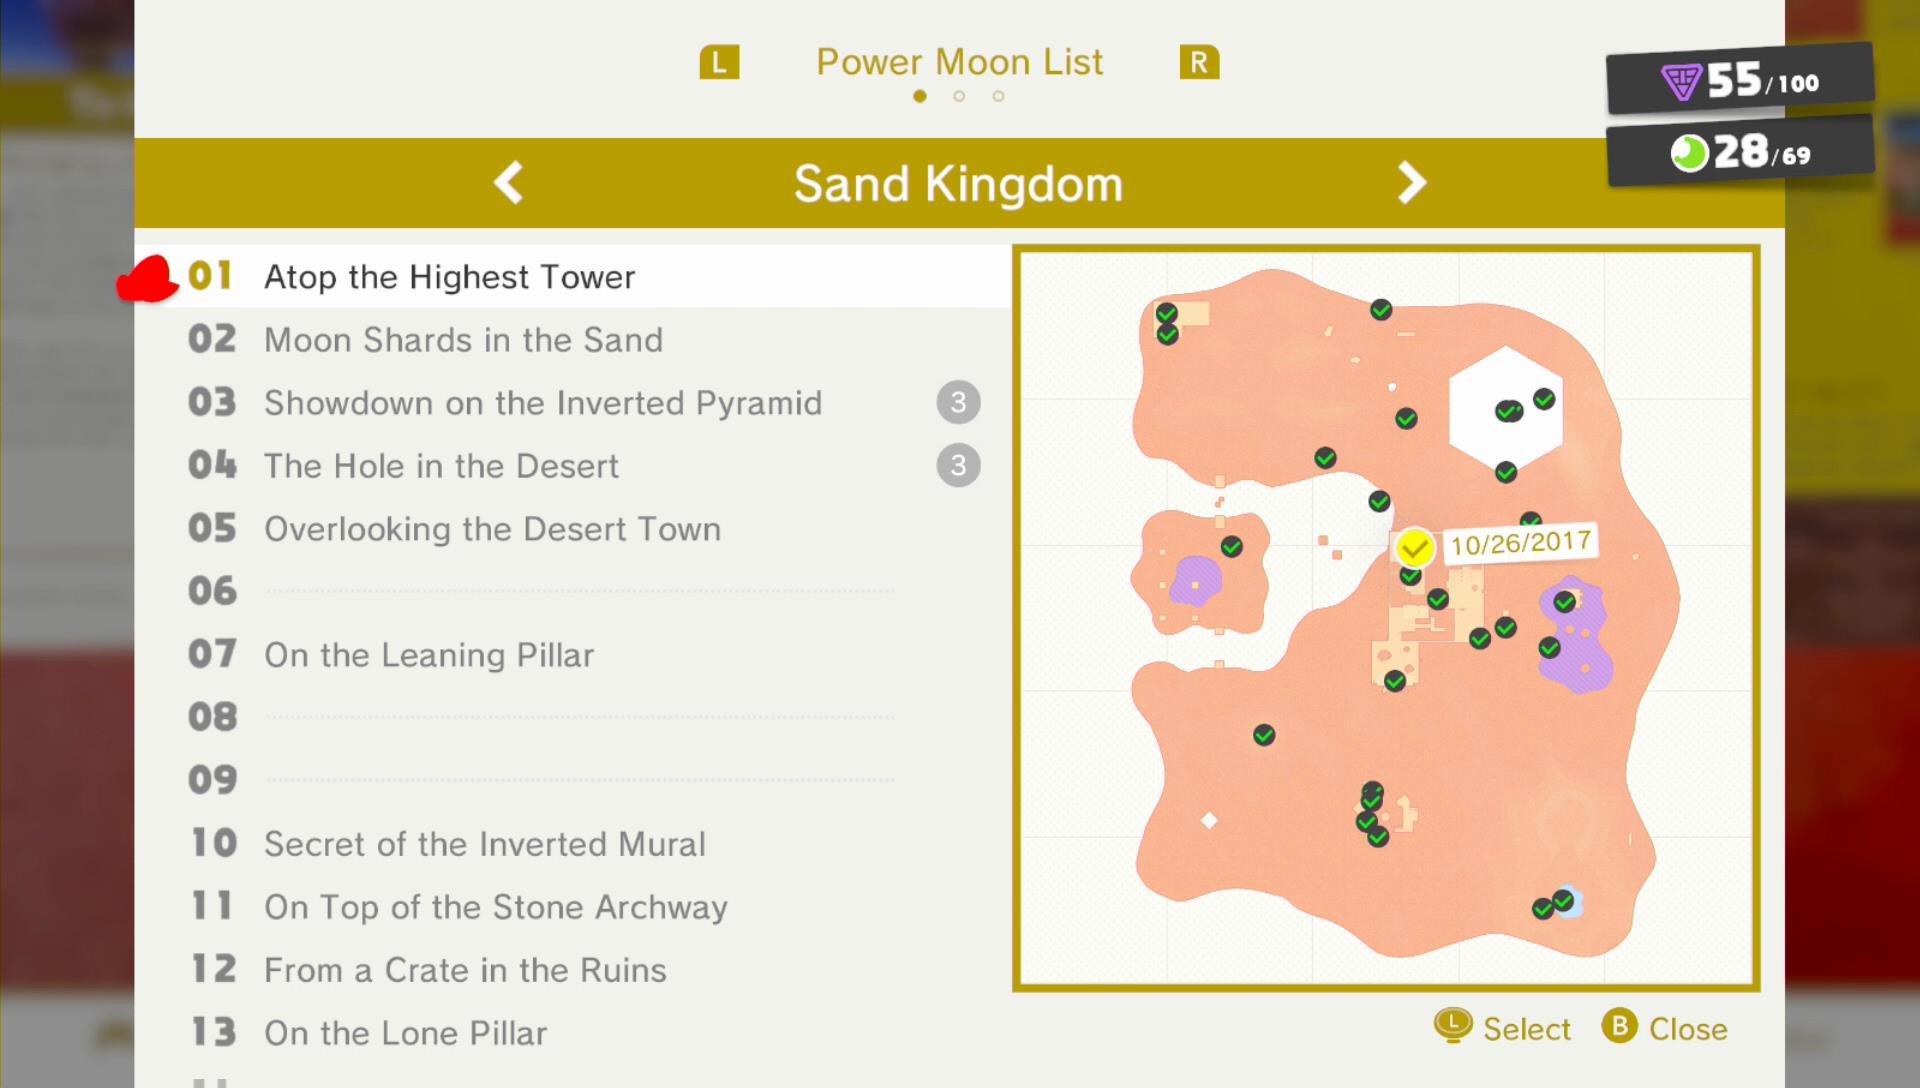 List of Power Moons in the Sand Kingdom - Super Mario Wiki, the Mario  encyclopedia